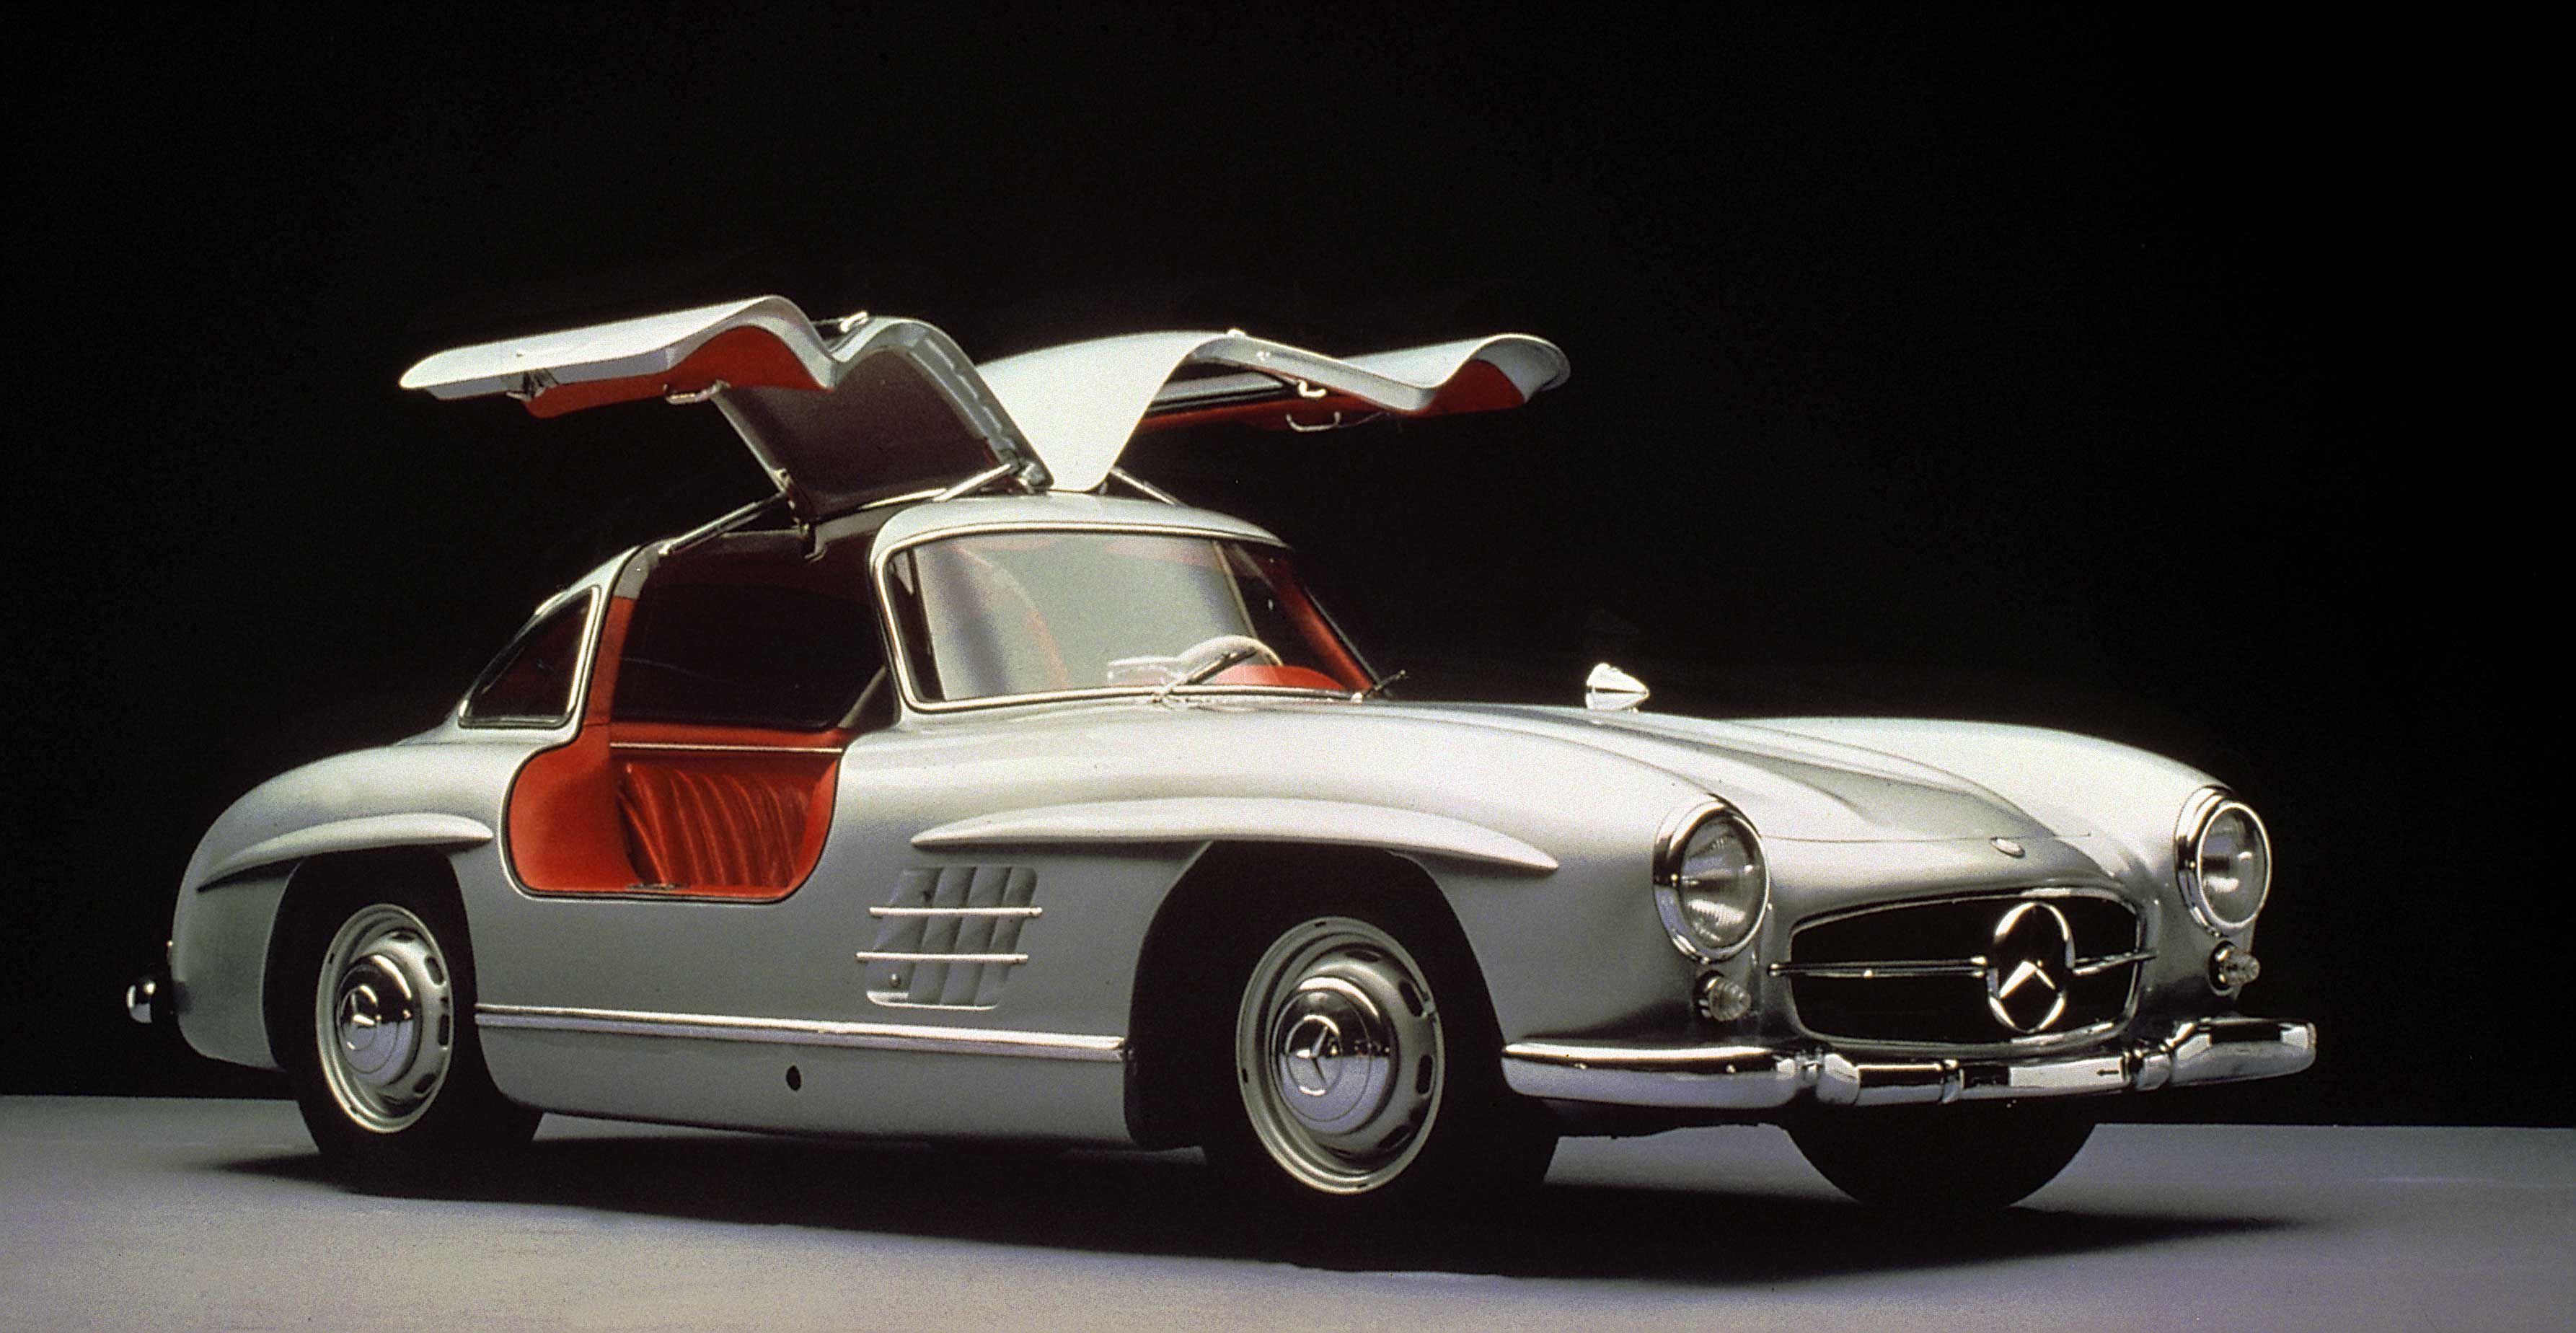 25 Best Classic Cars To Drive - Top Vintage Cars of All Time